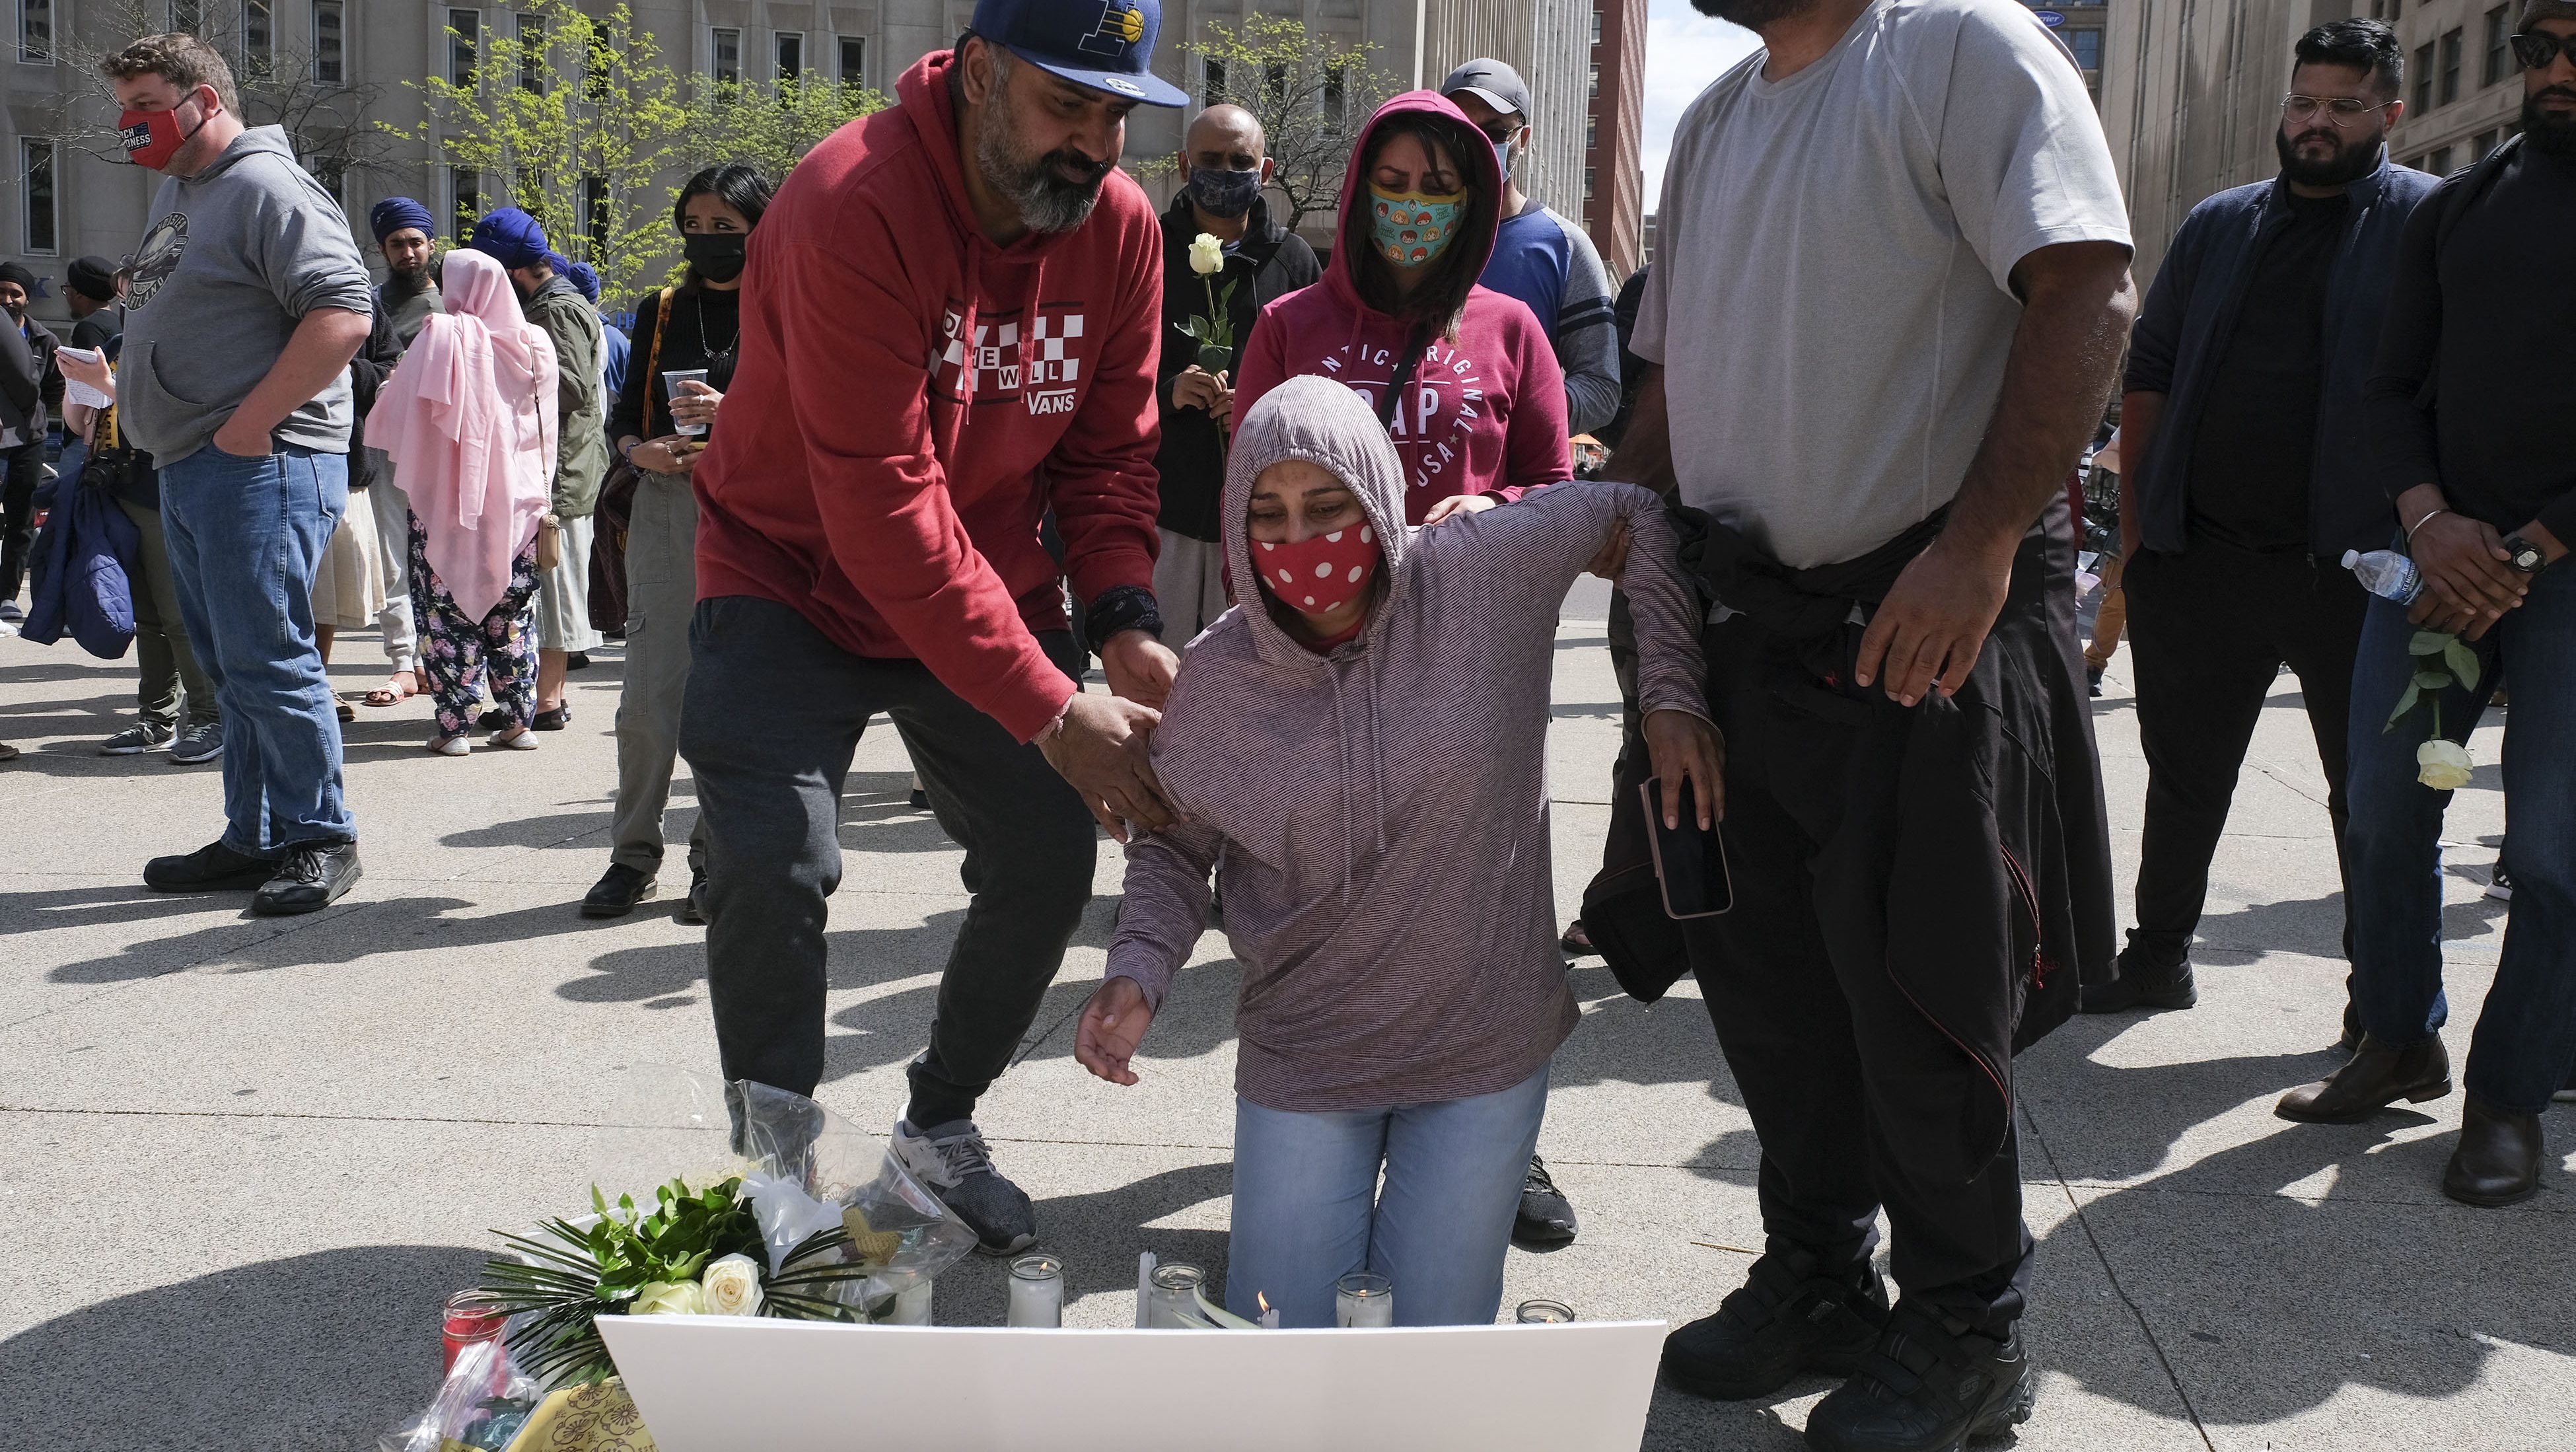 Family members of Amarjeet Johal, who was killed in a mass shooting, attend a vigil in Indianapolis, Indiana on April 18, 2021, to remember the victims of a mass shooting at a local FedEx facility which took the lives of eight people.